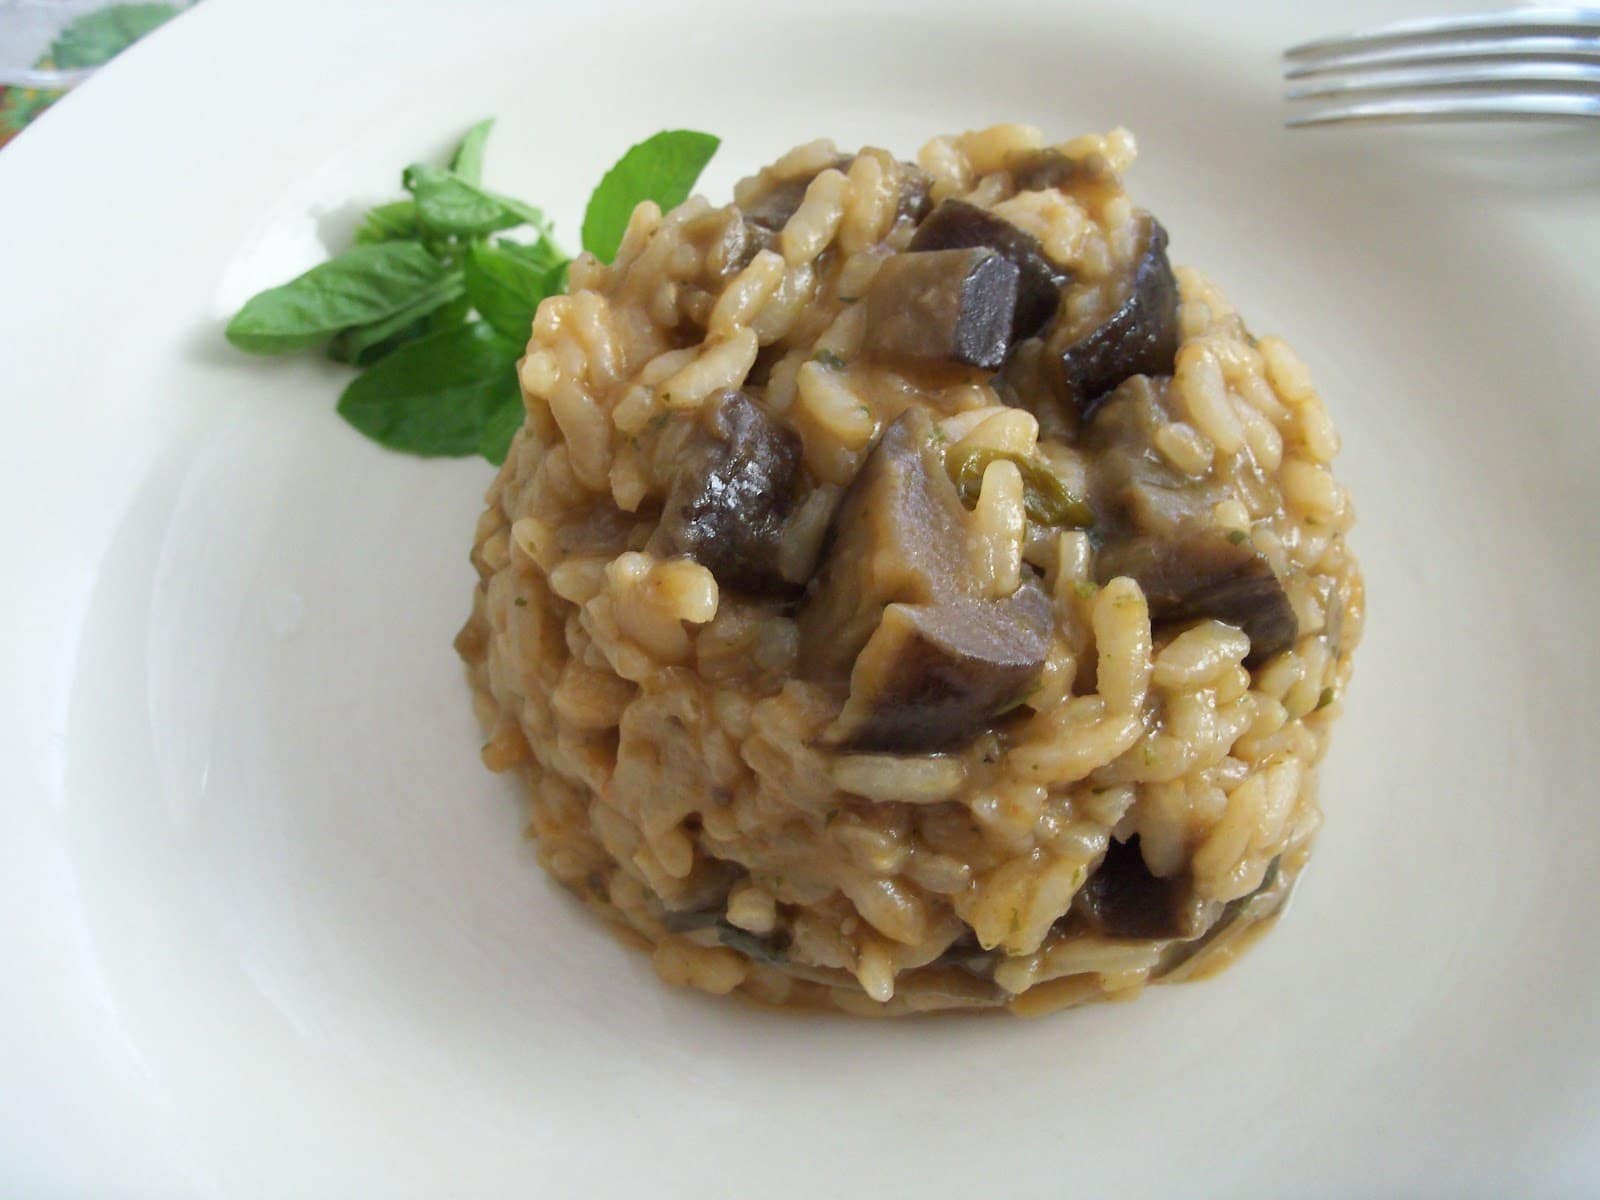 Risotto with eggplant is a recipe that would delight even those who don't normally eat eggplants.